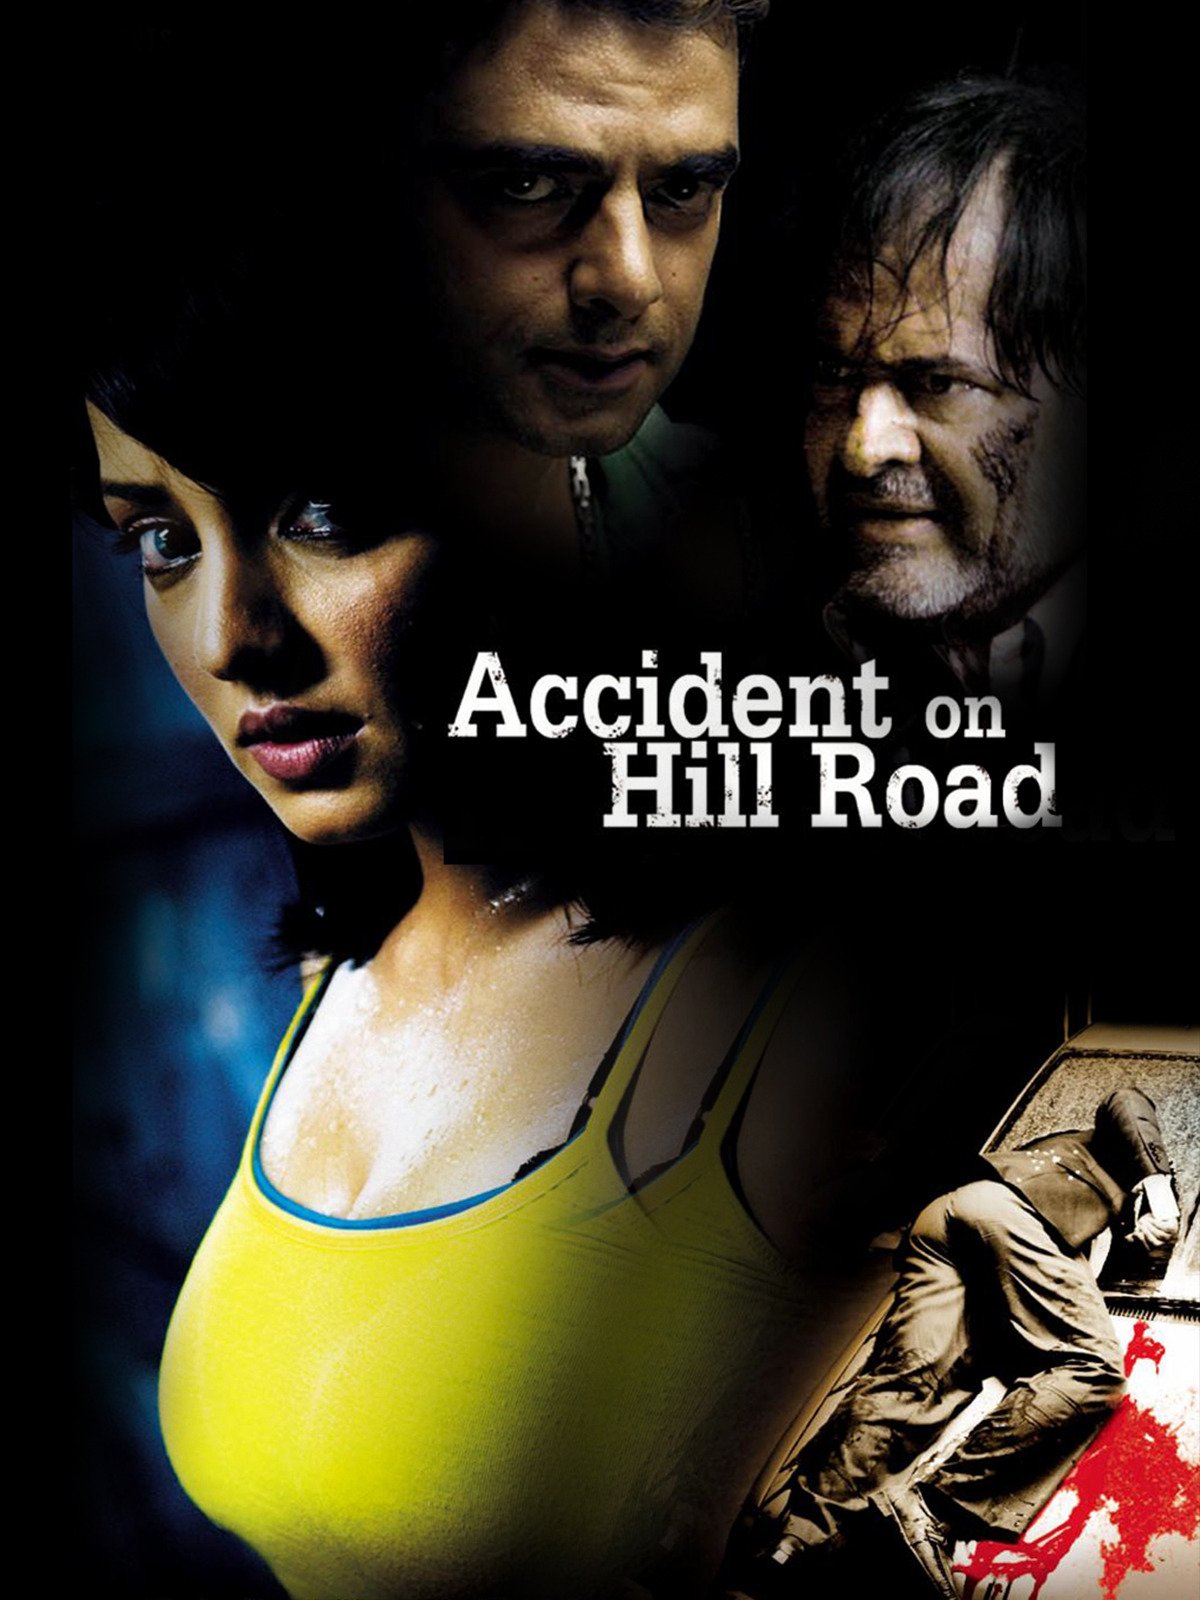 Accident On Hill Road 2010 7497 Poster.jpg